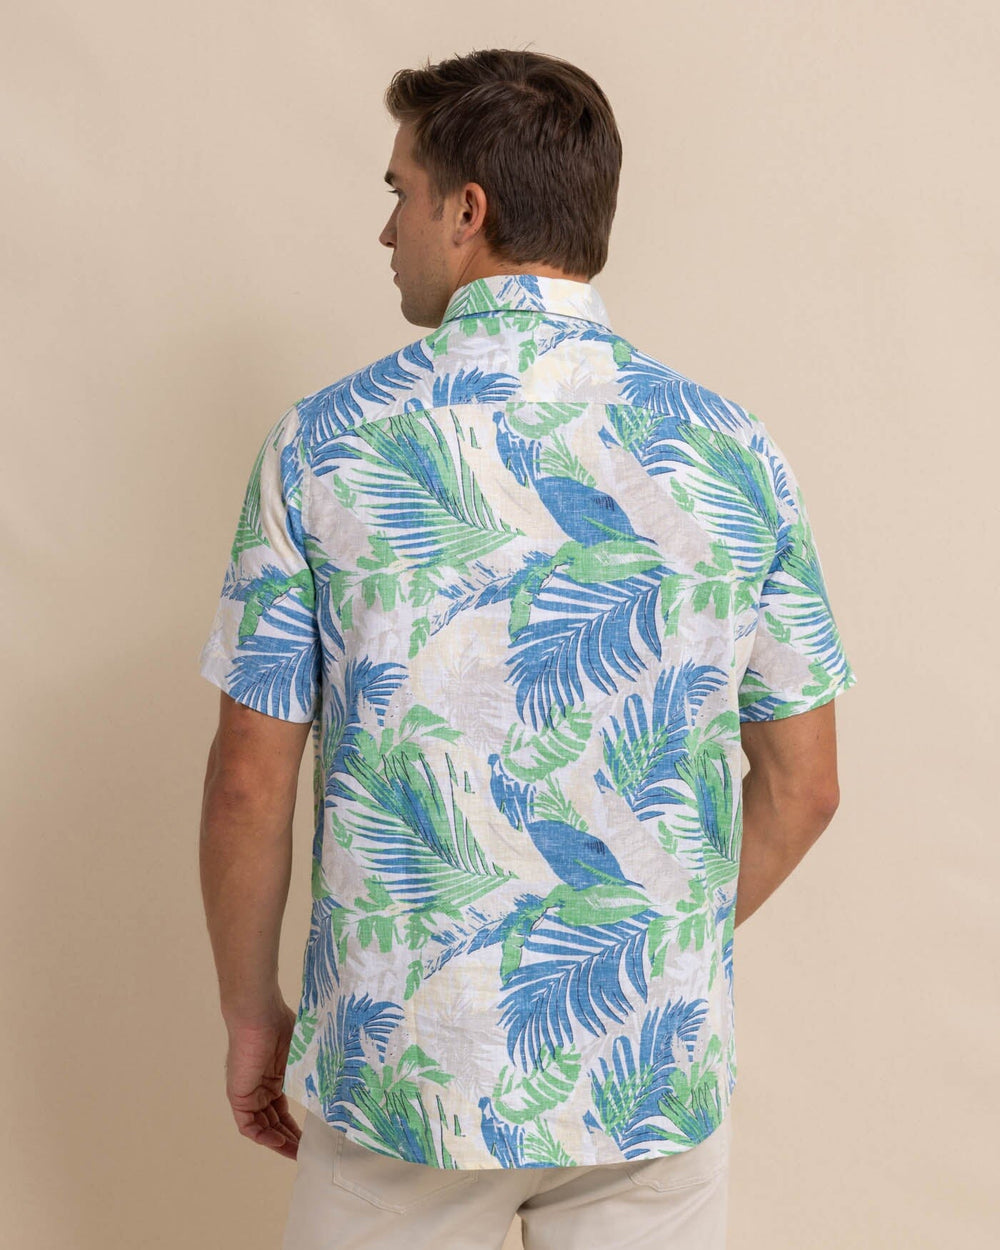 The back view of the Southern Tide Paradise Palms Linen Rayon Short Sleeve Sport Shirt by Southern Tide - Classic White